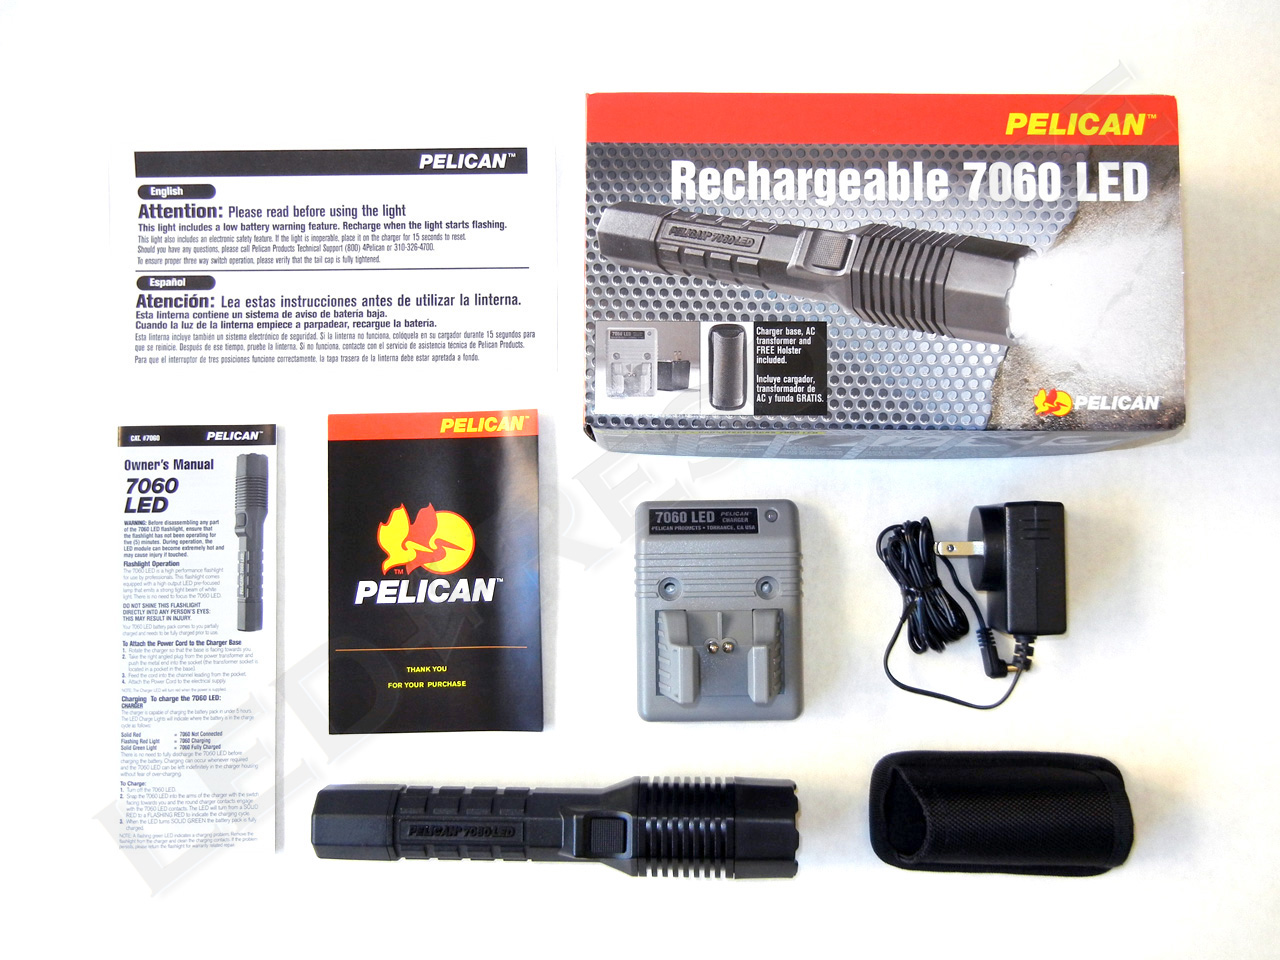 **Car DC Charger for Pelican 7060 LED Rechargeable Pelican Flashlight 